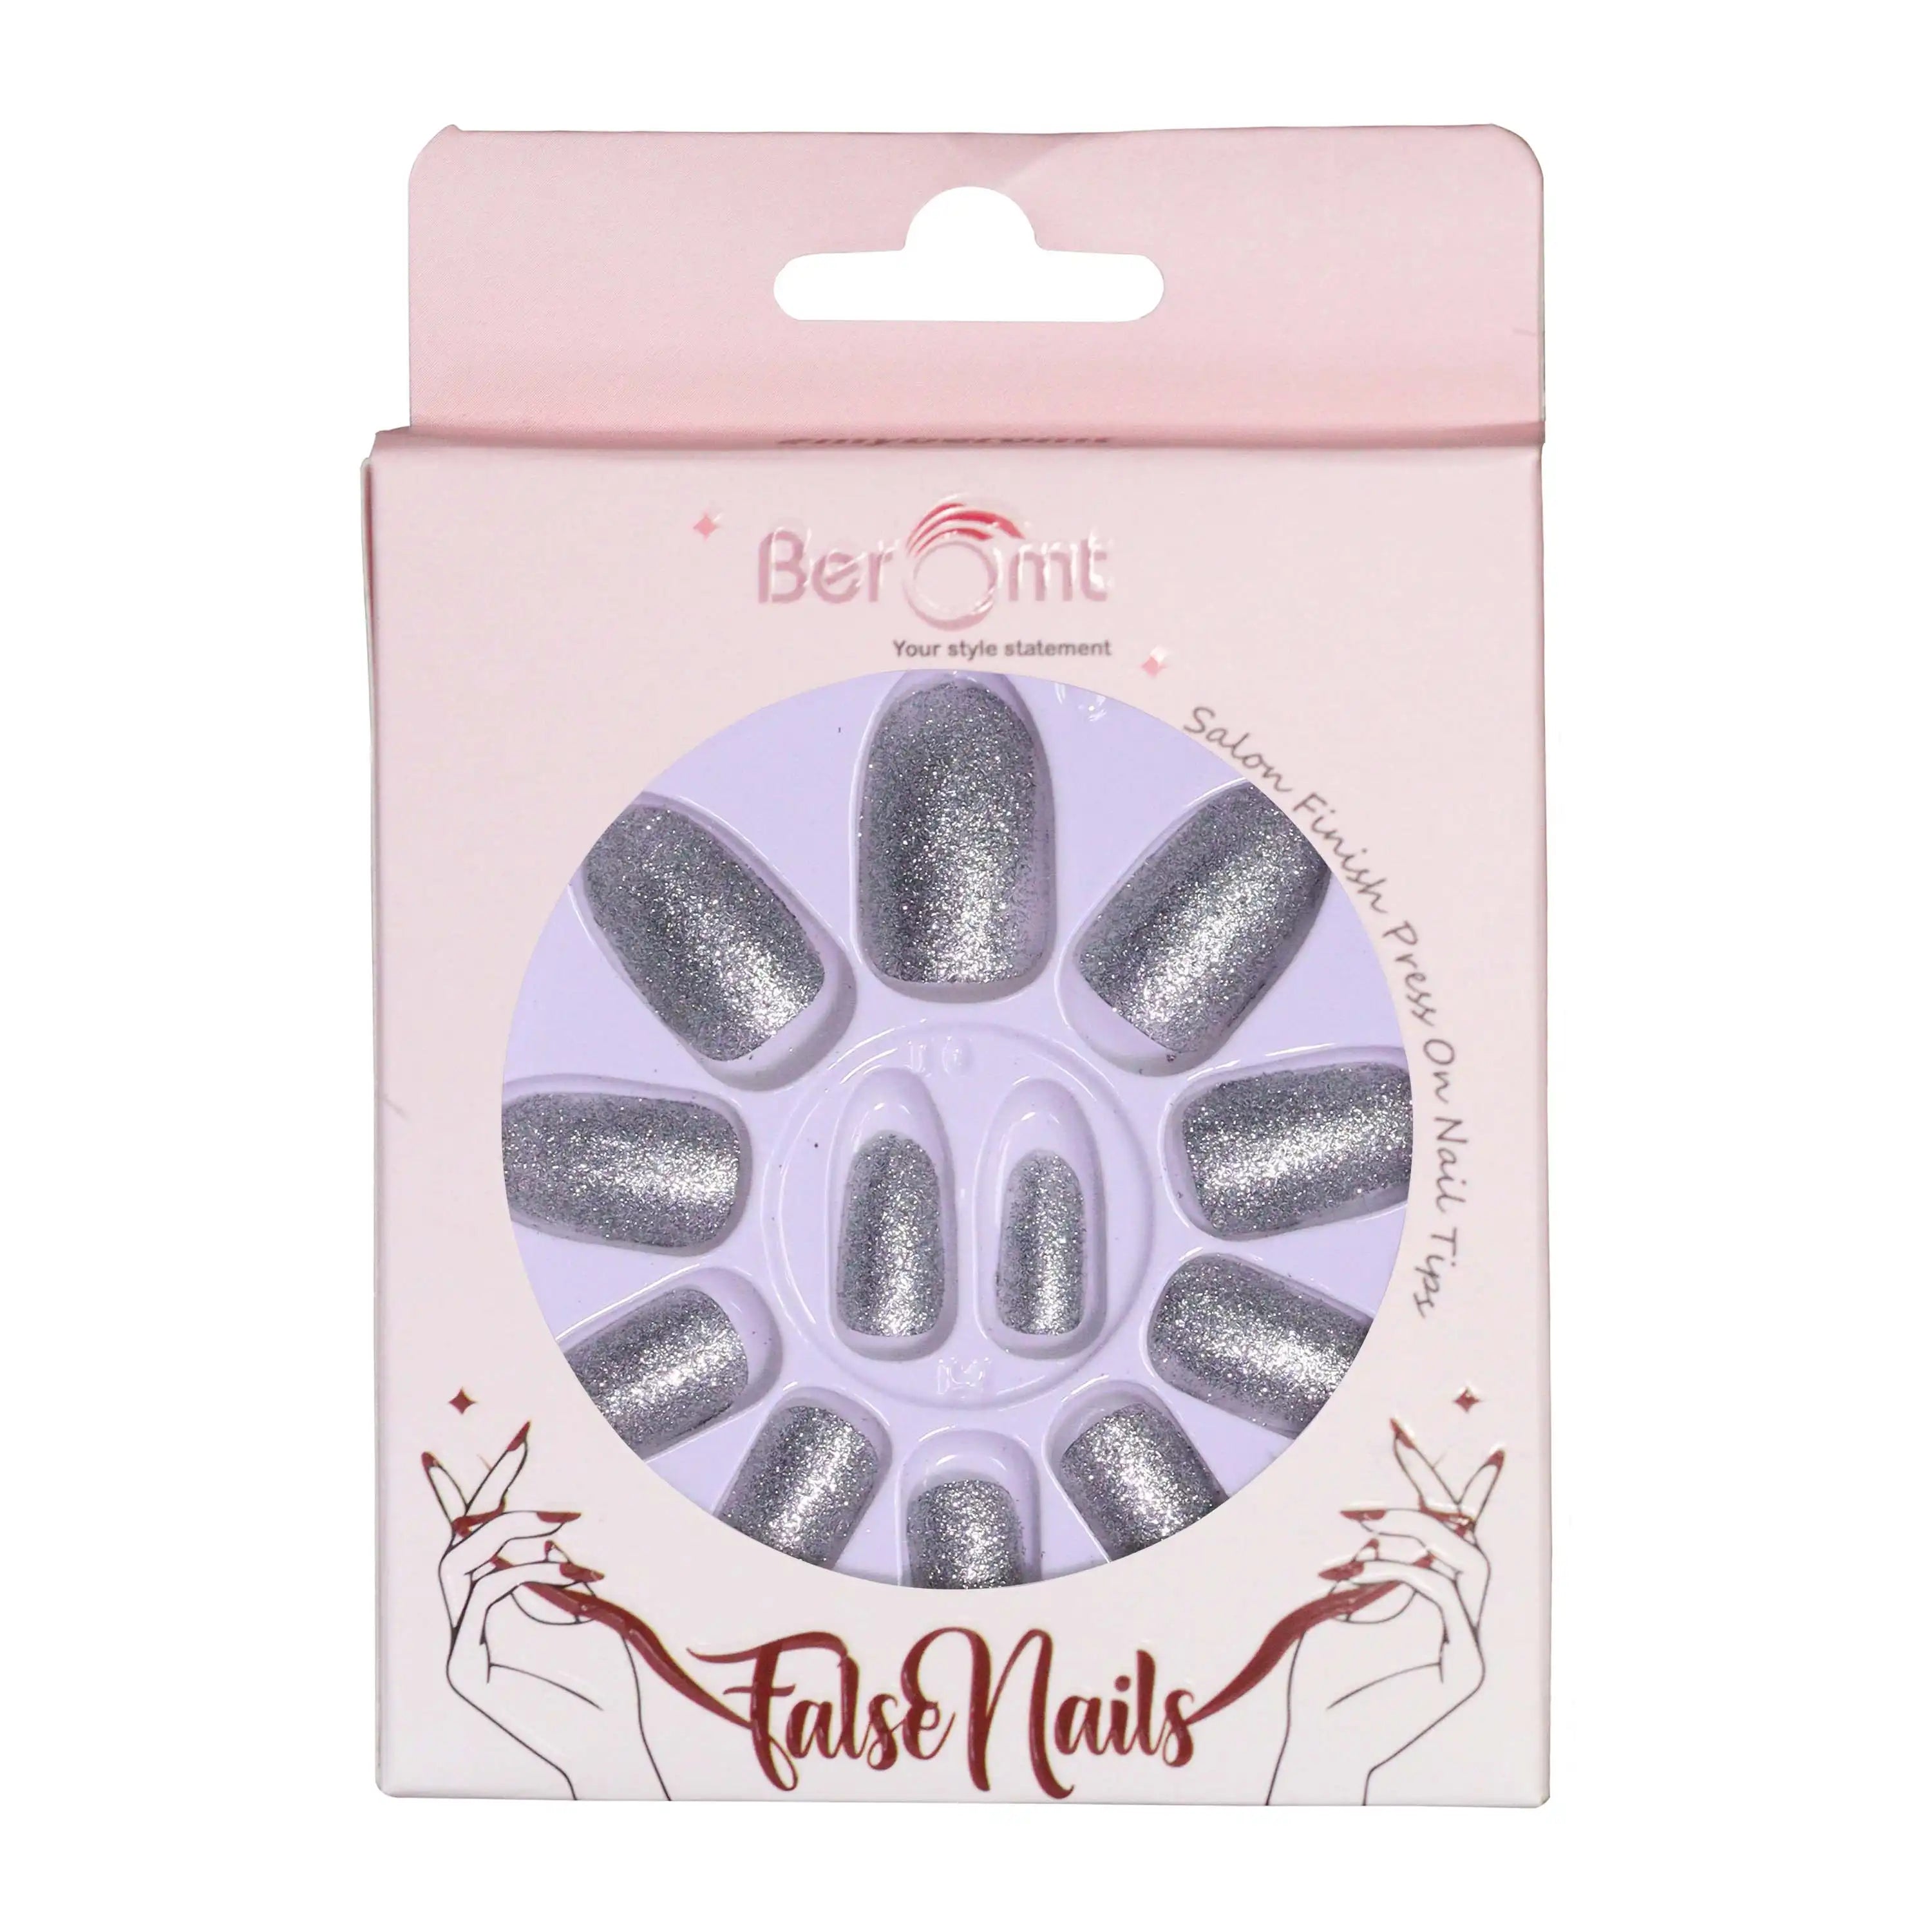 GLITTER NAILS-767 (NAIL KIT INCLUDED)